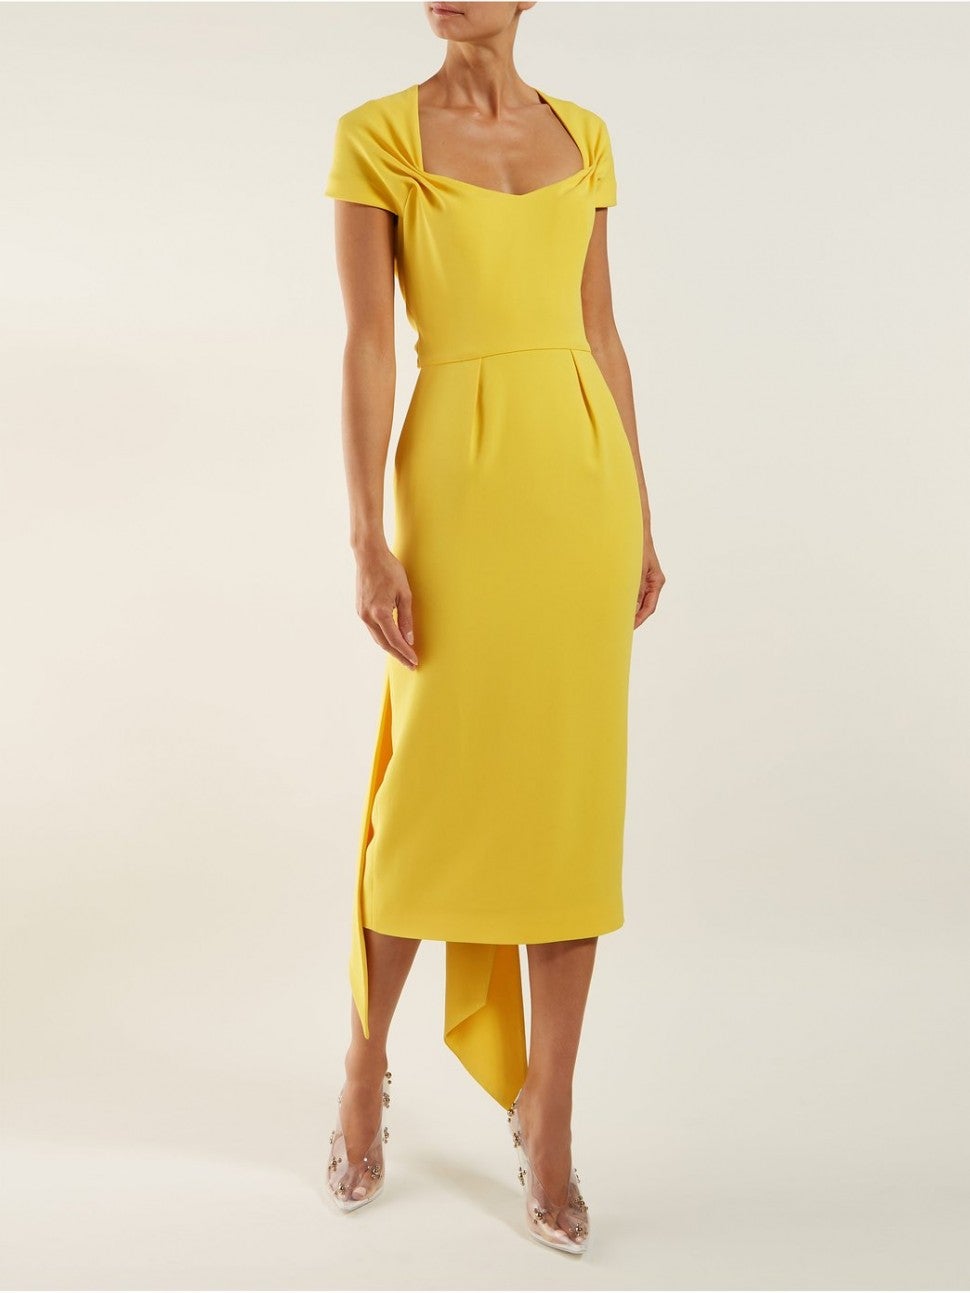 You Can Now Shop the Yellow Dress Amal Clooney Wore to the Royal ...